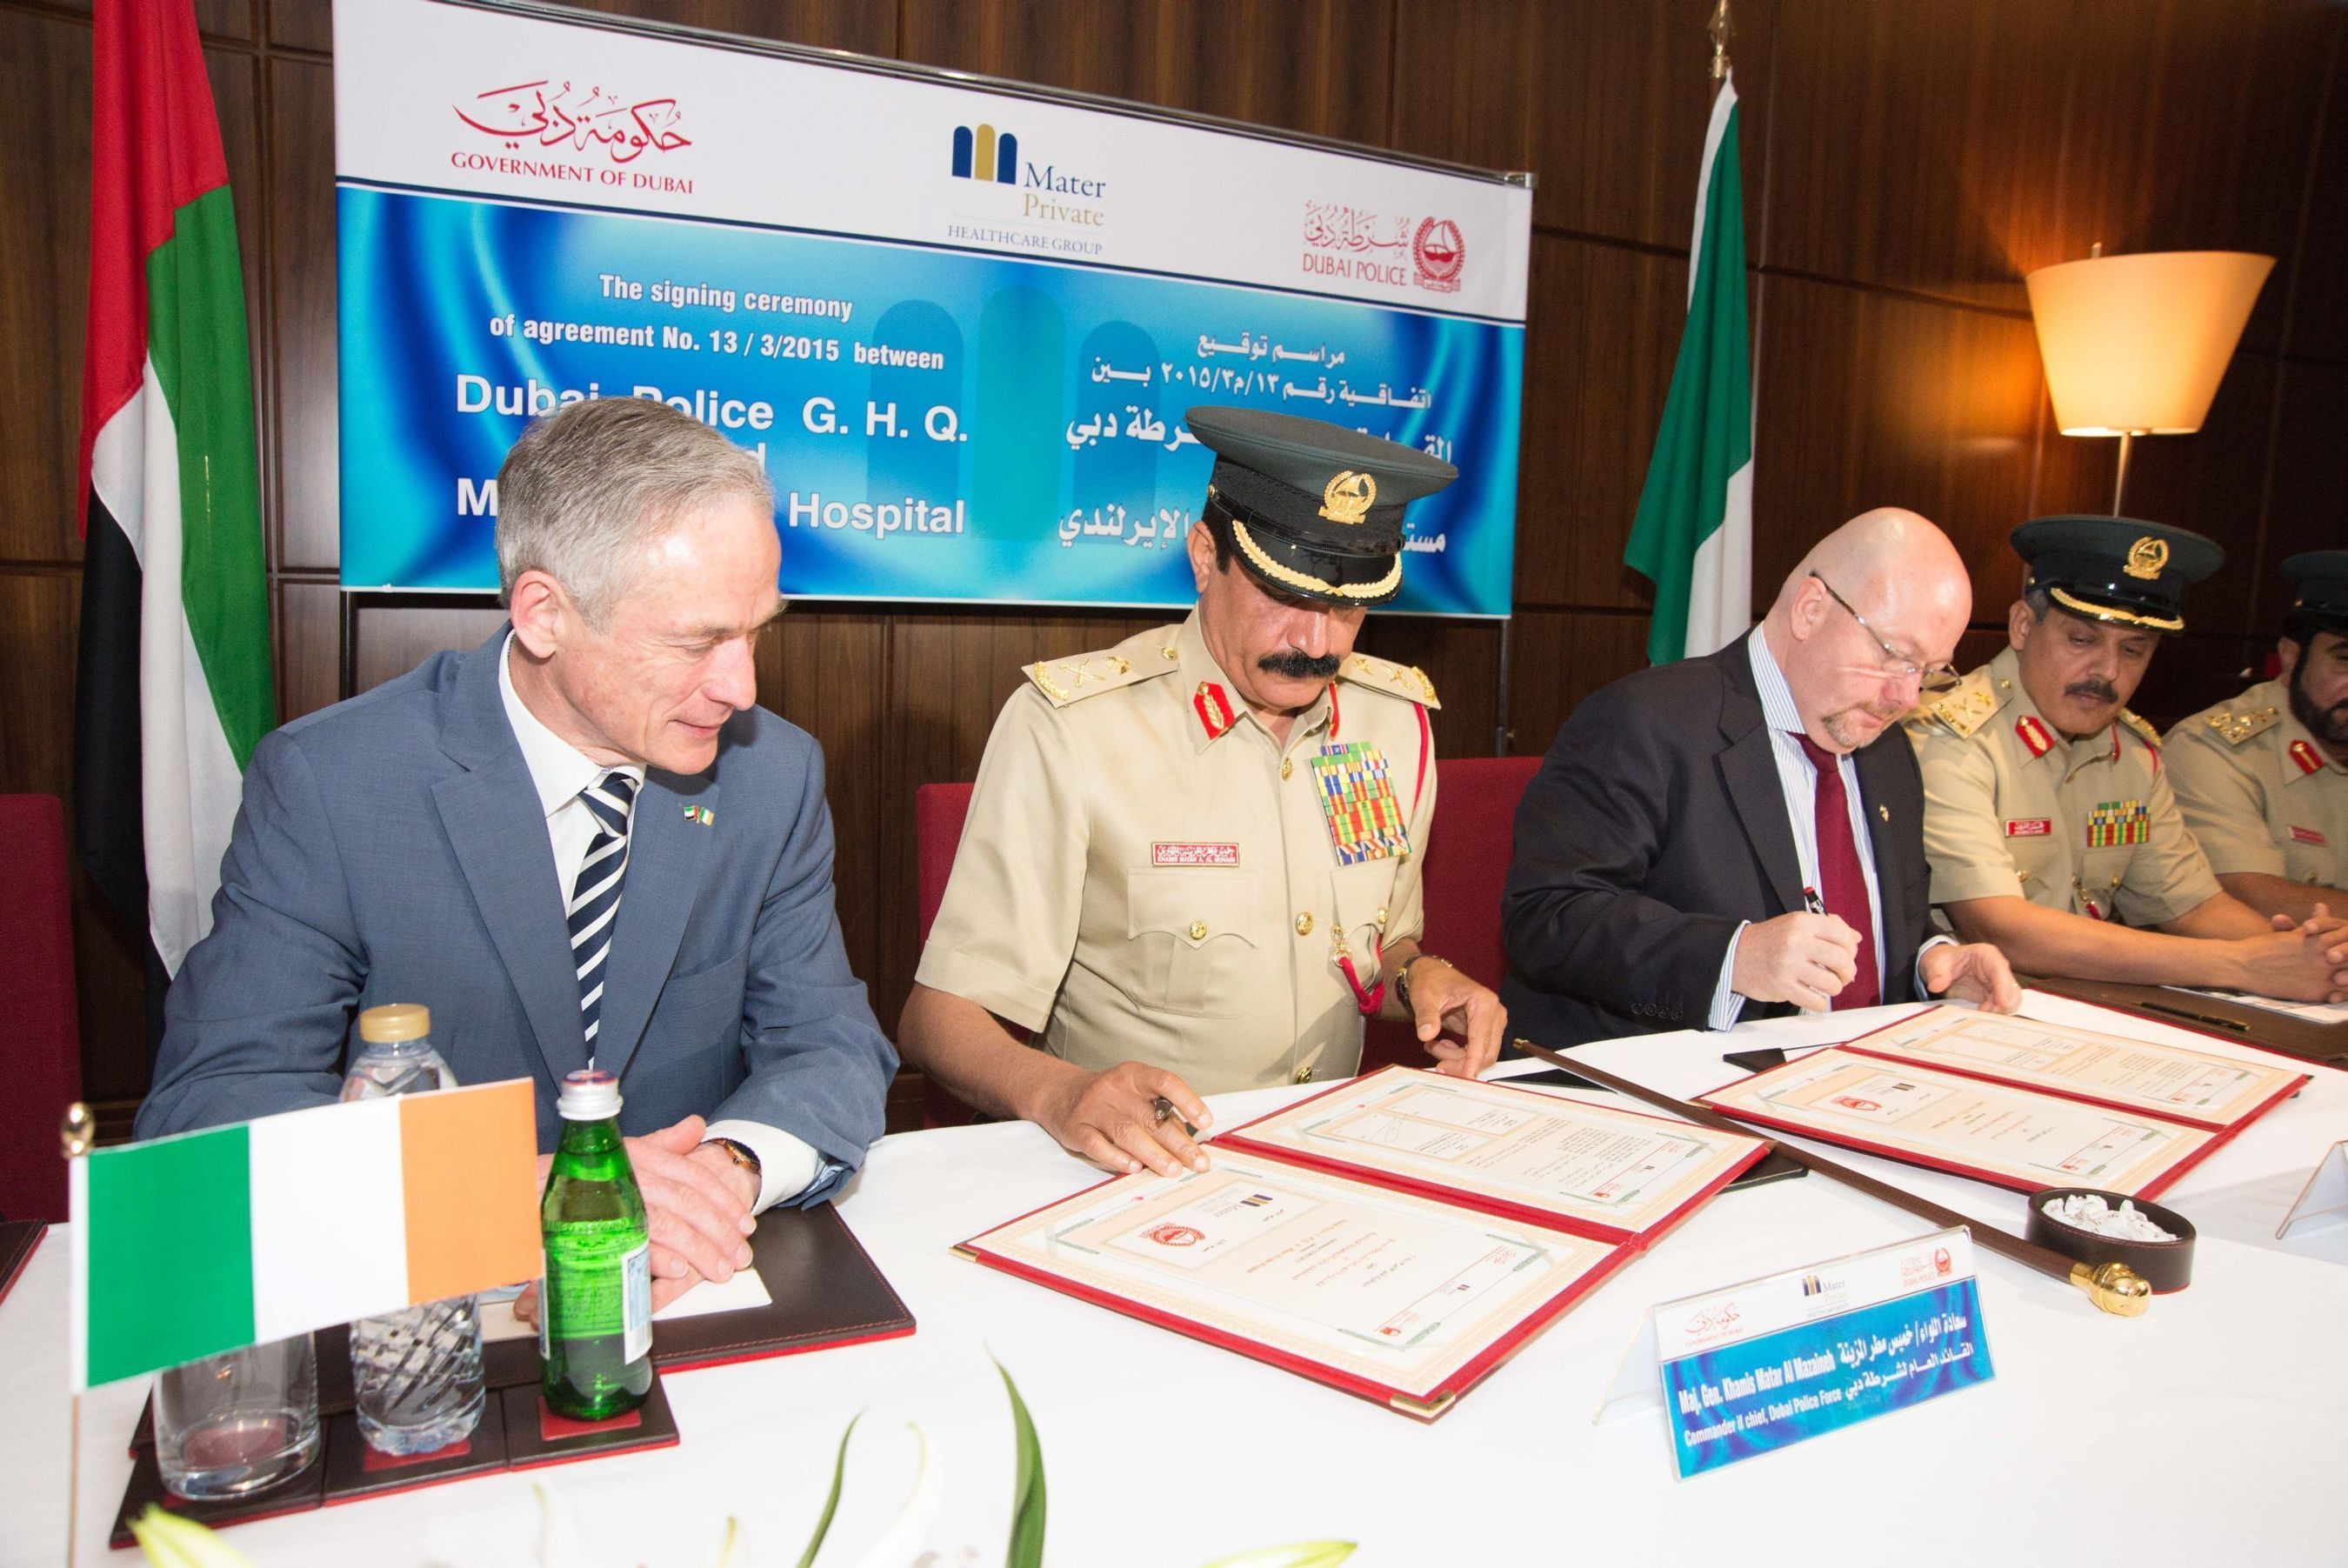 Minister Bruton announces Mater Private Healthcare Group agreement with Dubai Police. (PRNewsFoto/Mater Private)